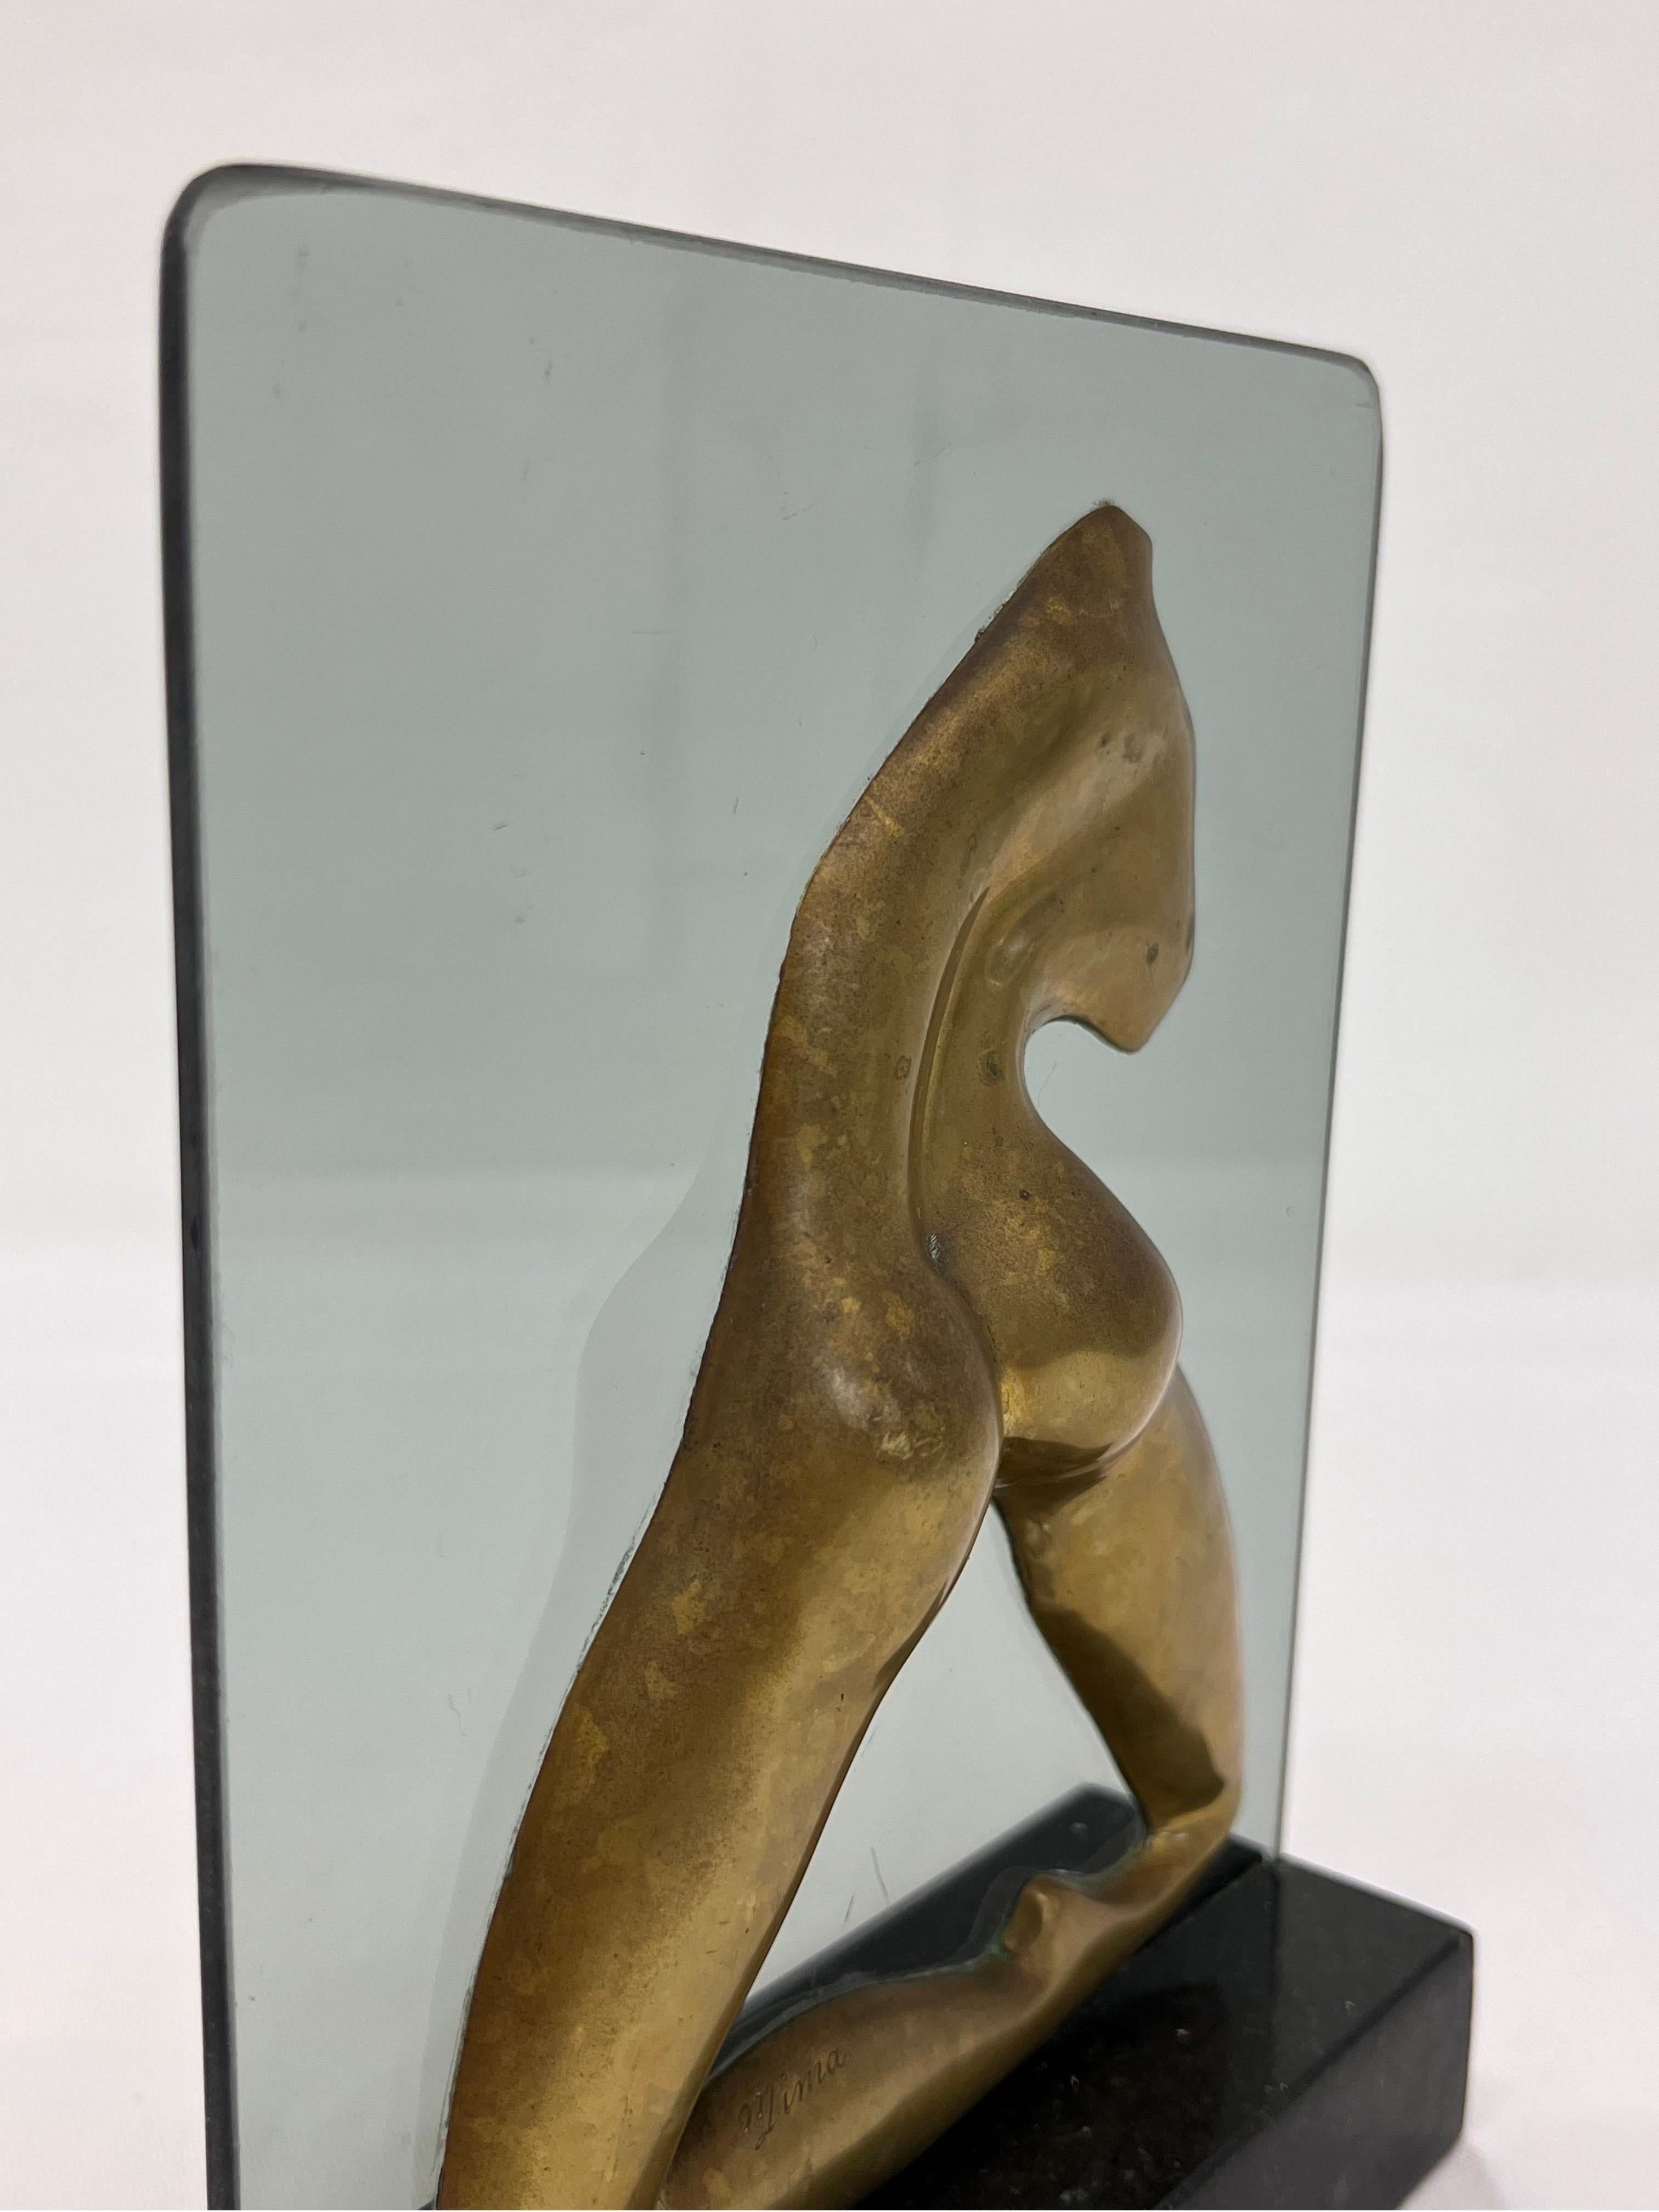 Brazilian Mid-Century Modern Bronze Sculpture on Glass and Granite Base, 1960s For Sale 6